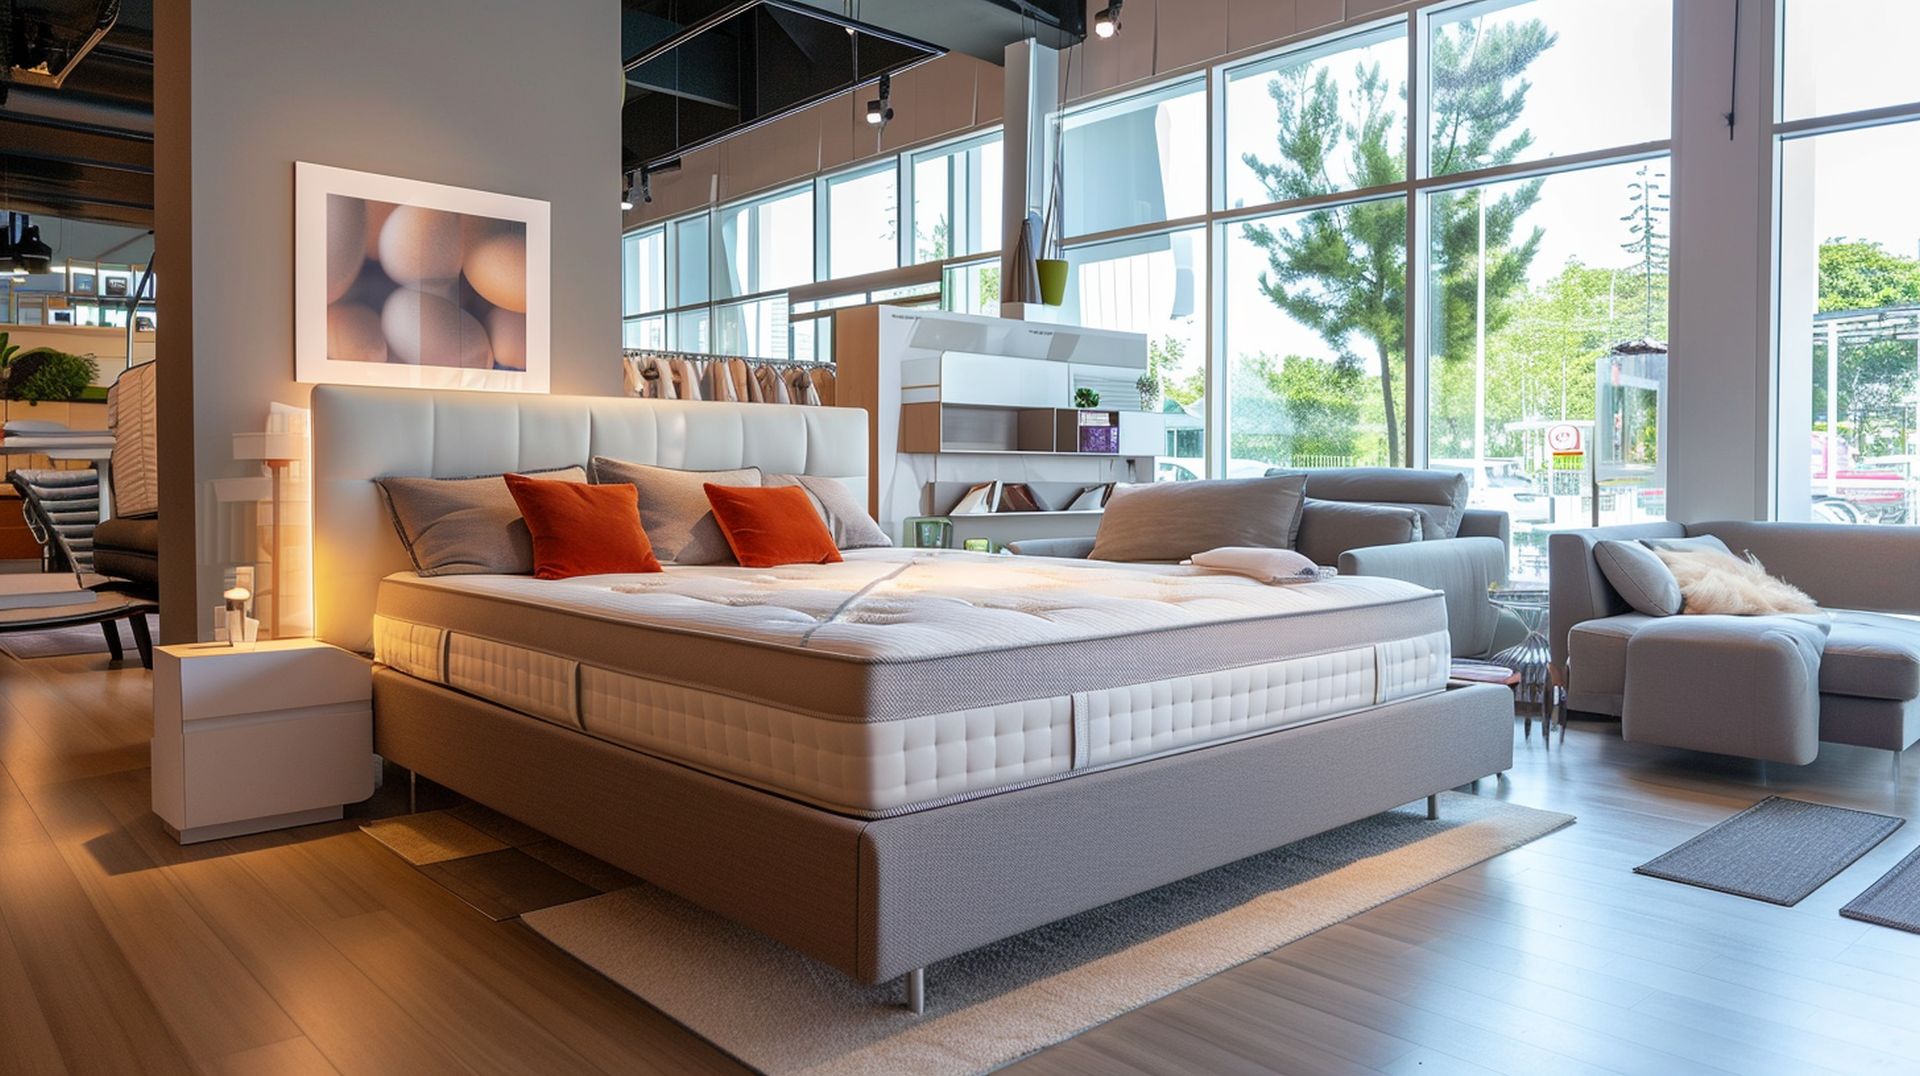 Types of mattresses at mattress dealers in Modesto, CA